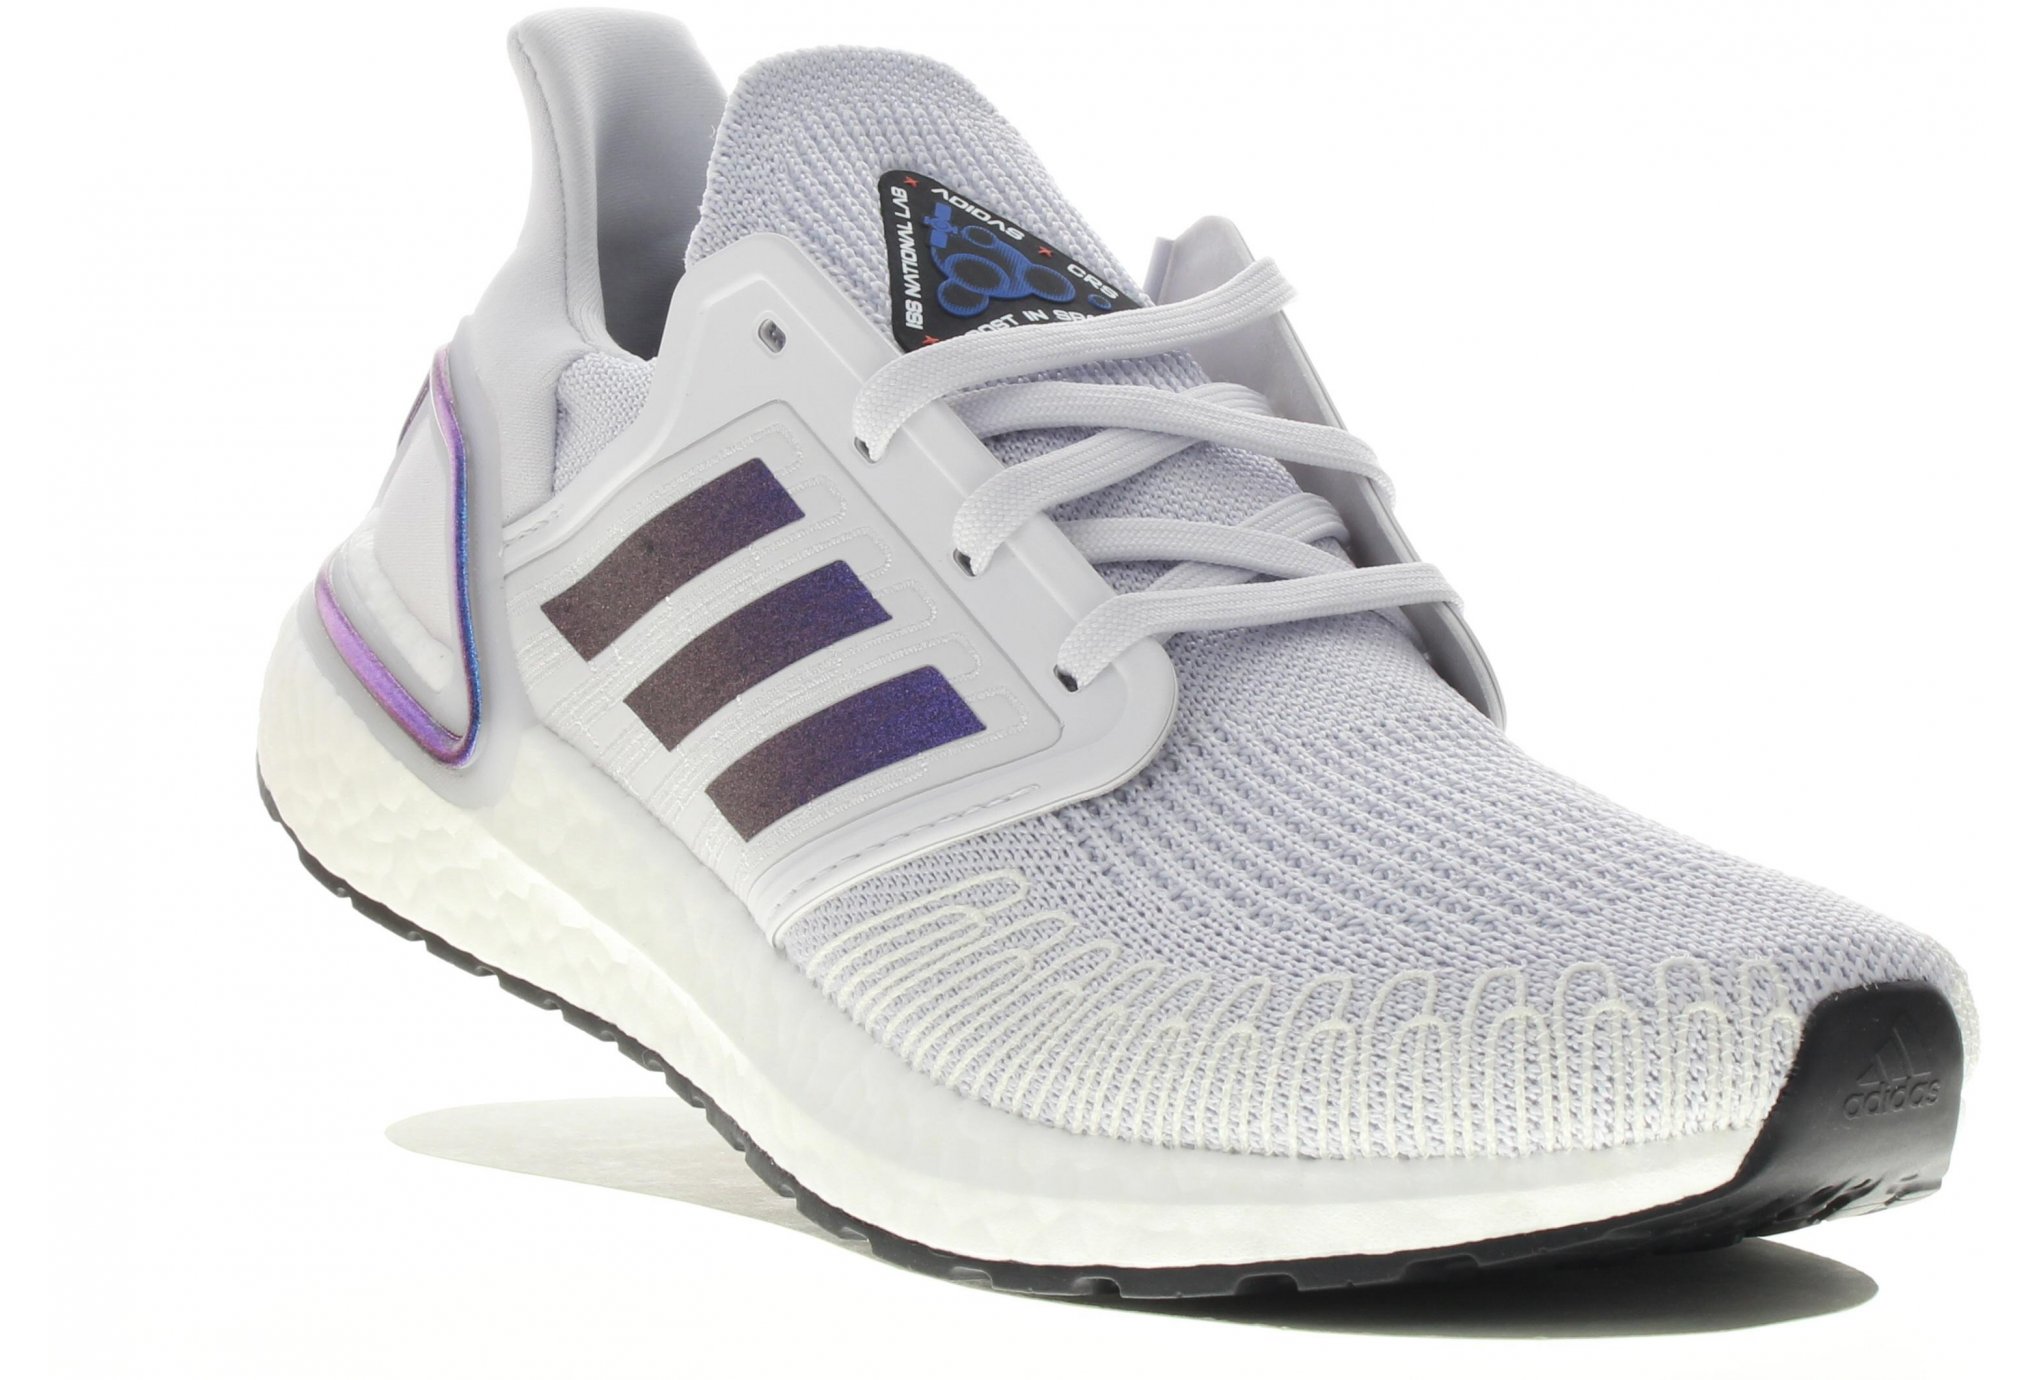 Adidas Ultraboost 20 W Femme Grisargent Pas Cher 9138